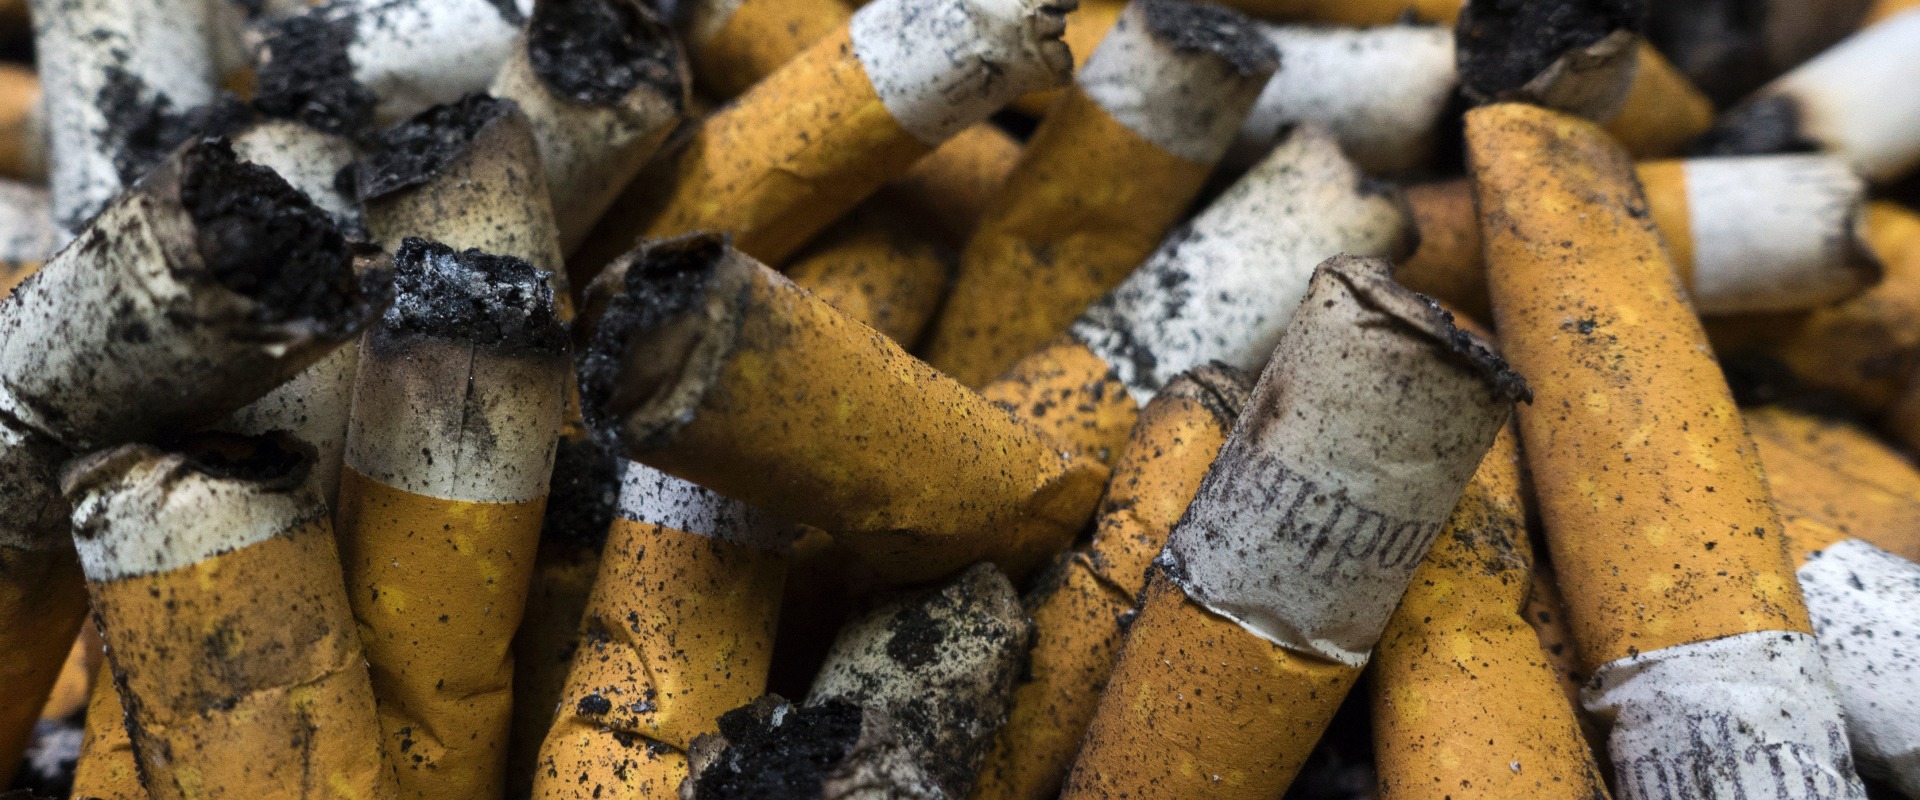 Regulating Tobacco in the US: An Expert's Perspective